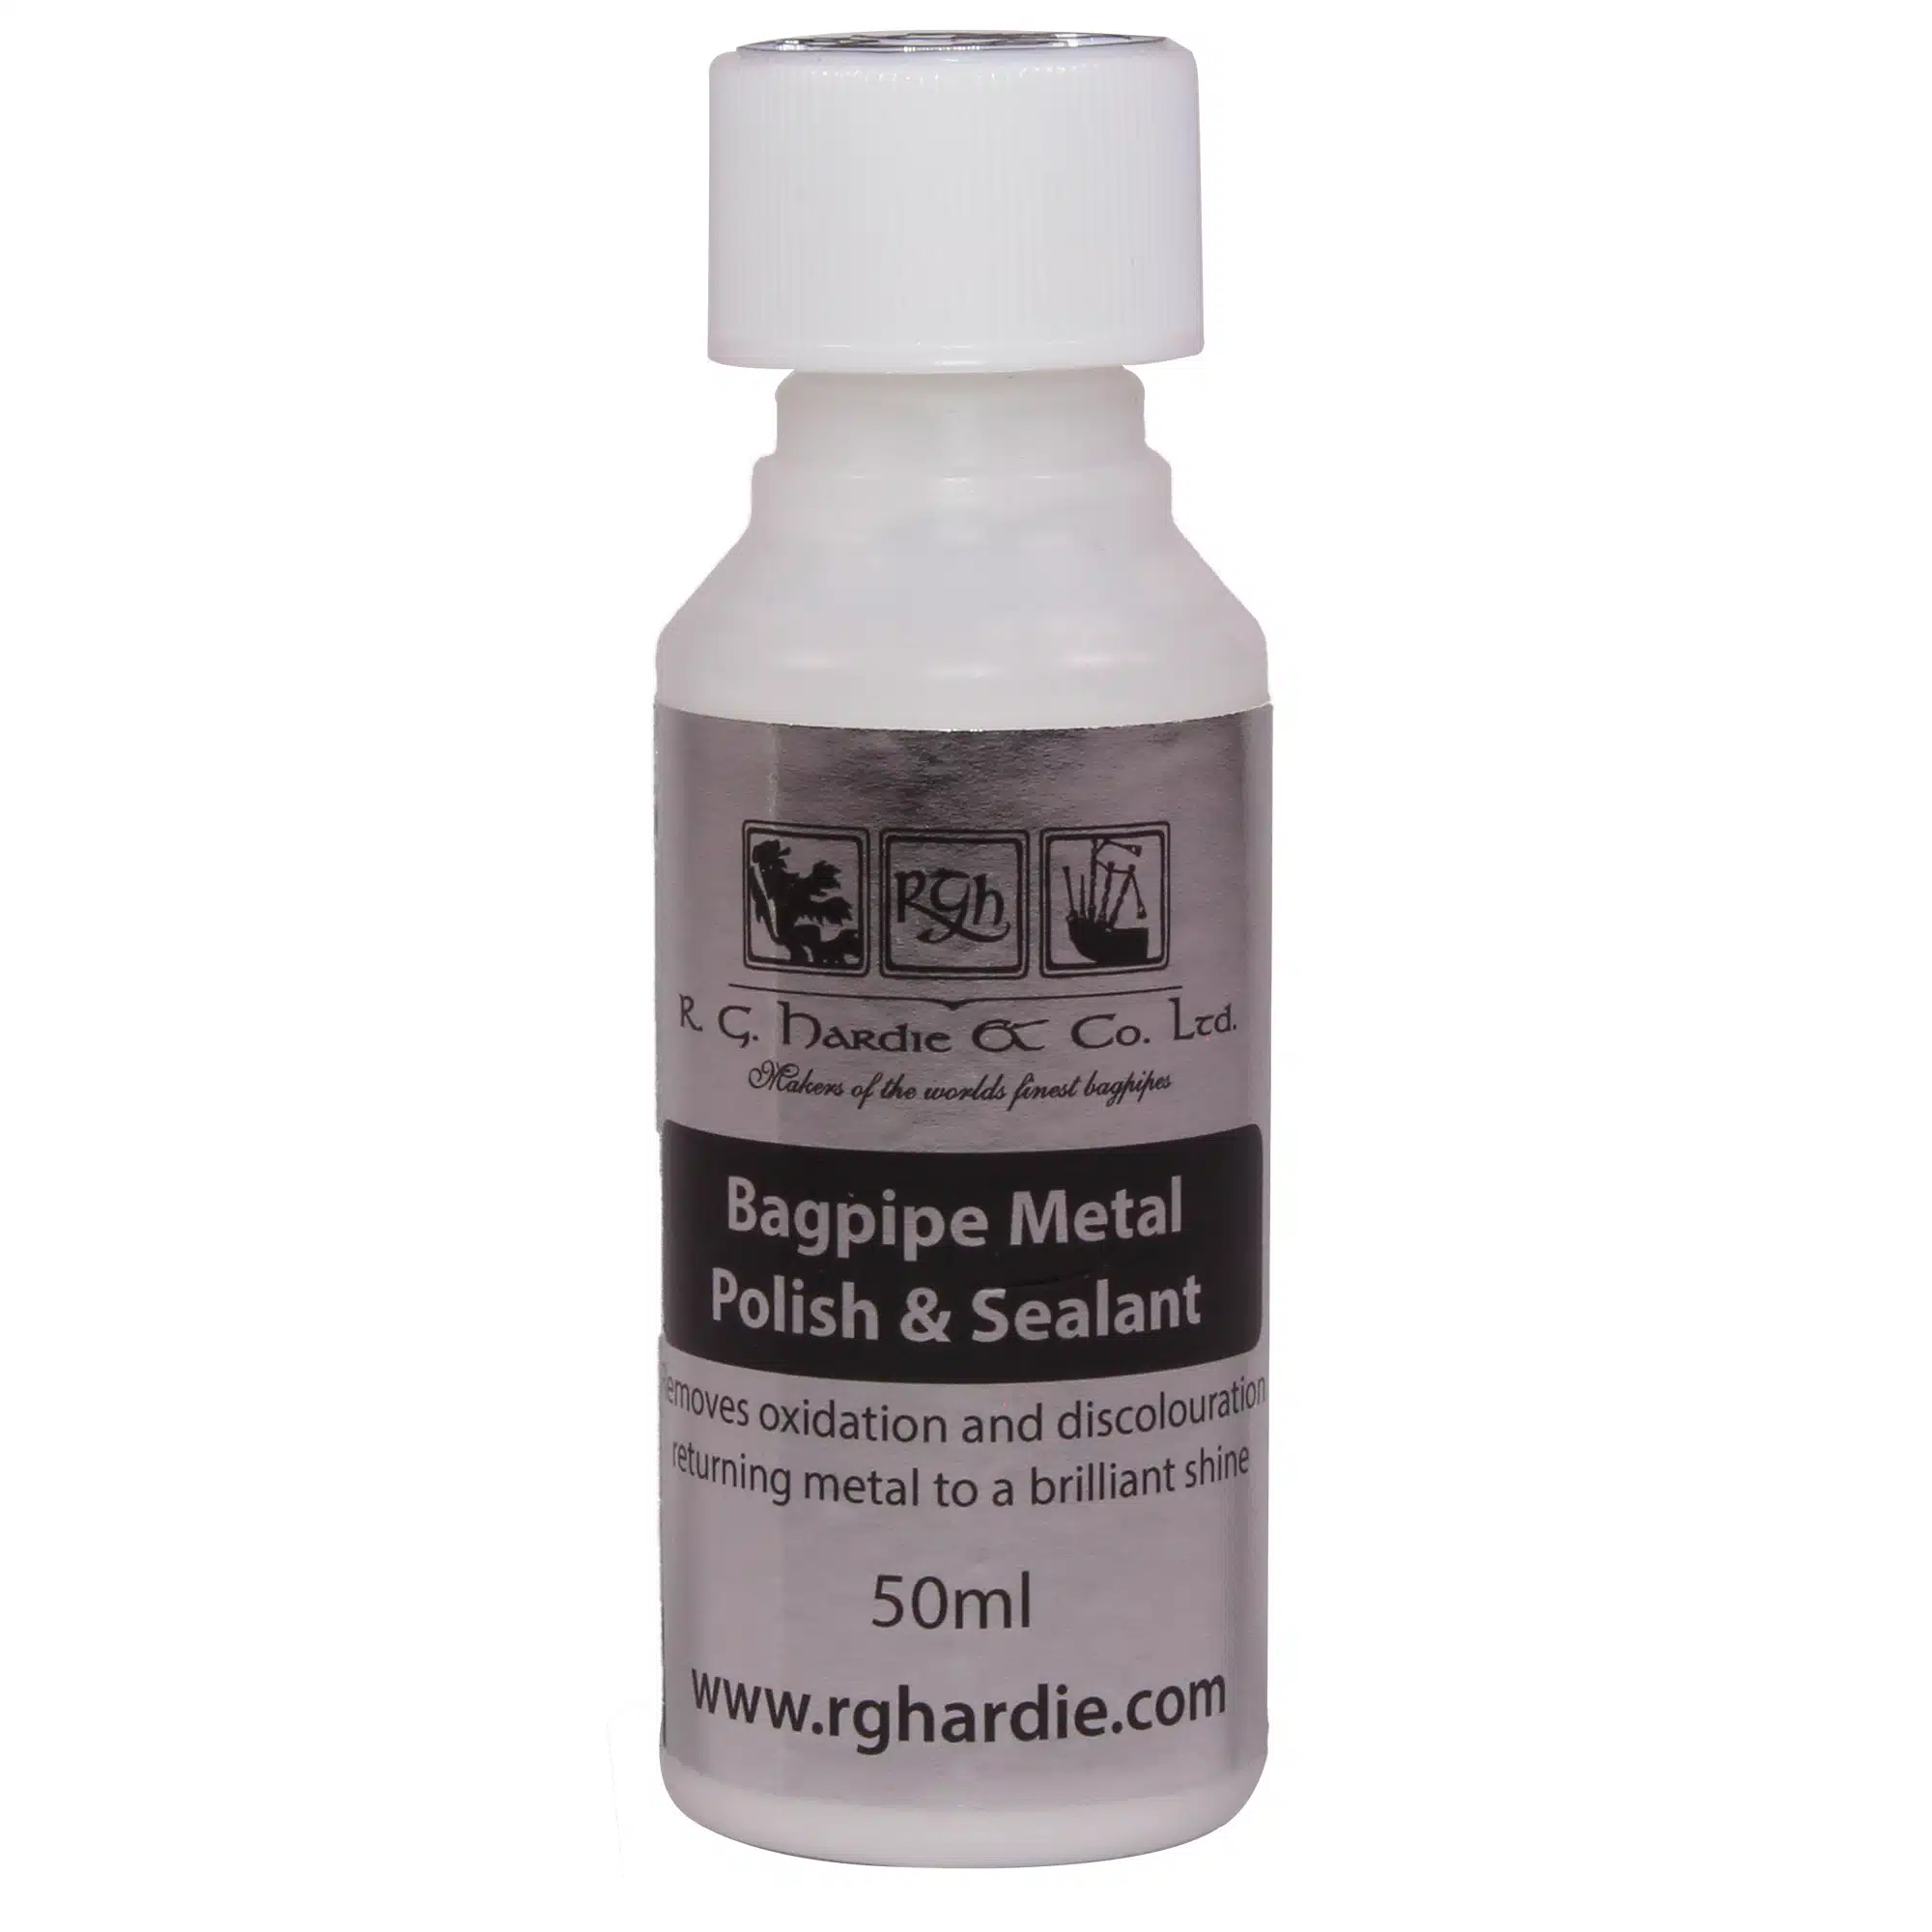 R.G. Hardie & Co. Bagpipe Metal Polish and Sealant - Henderson Imports